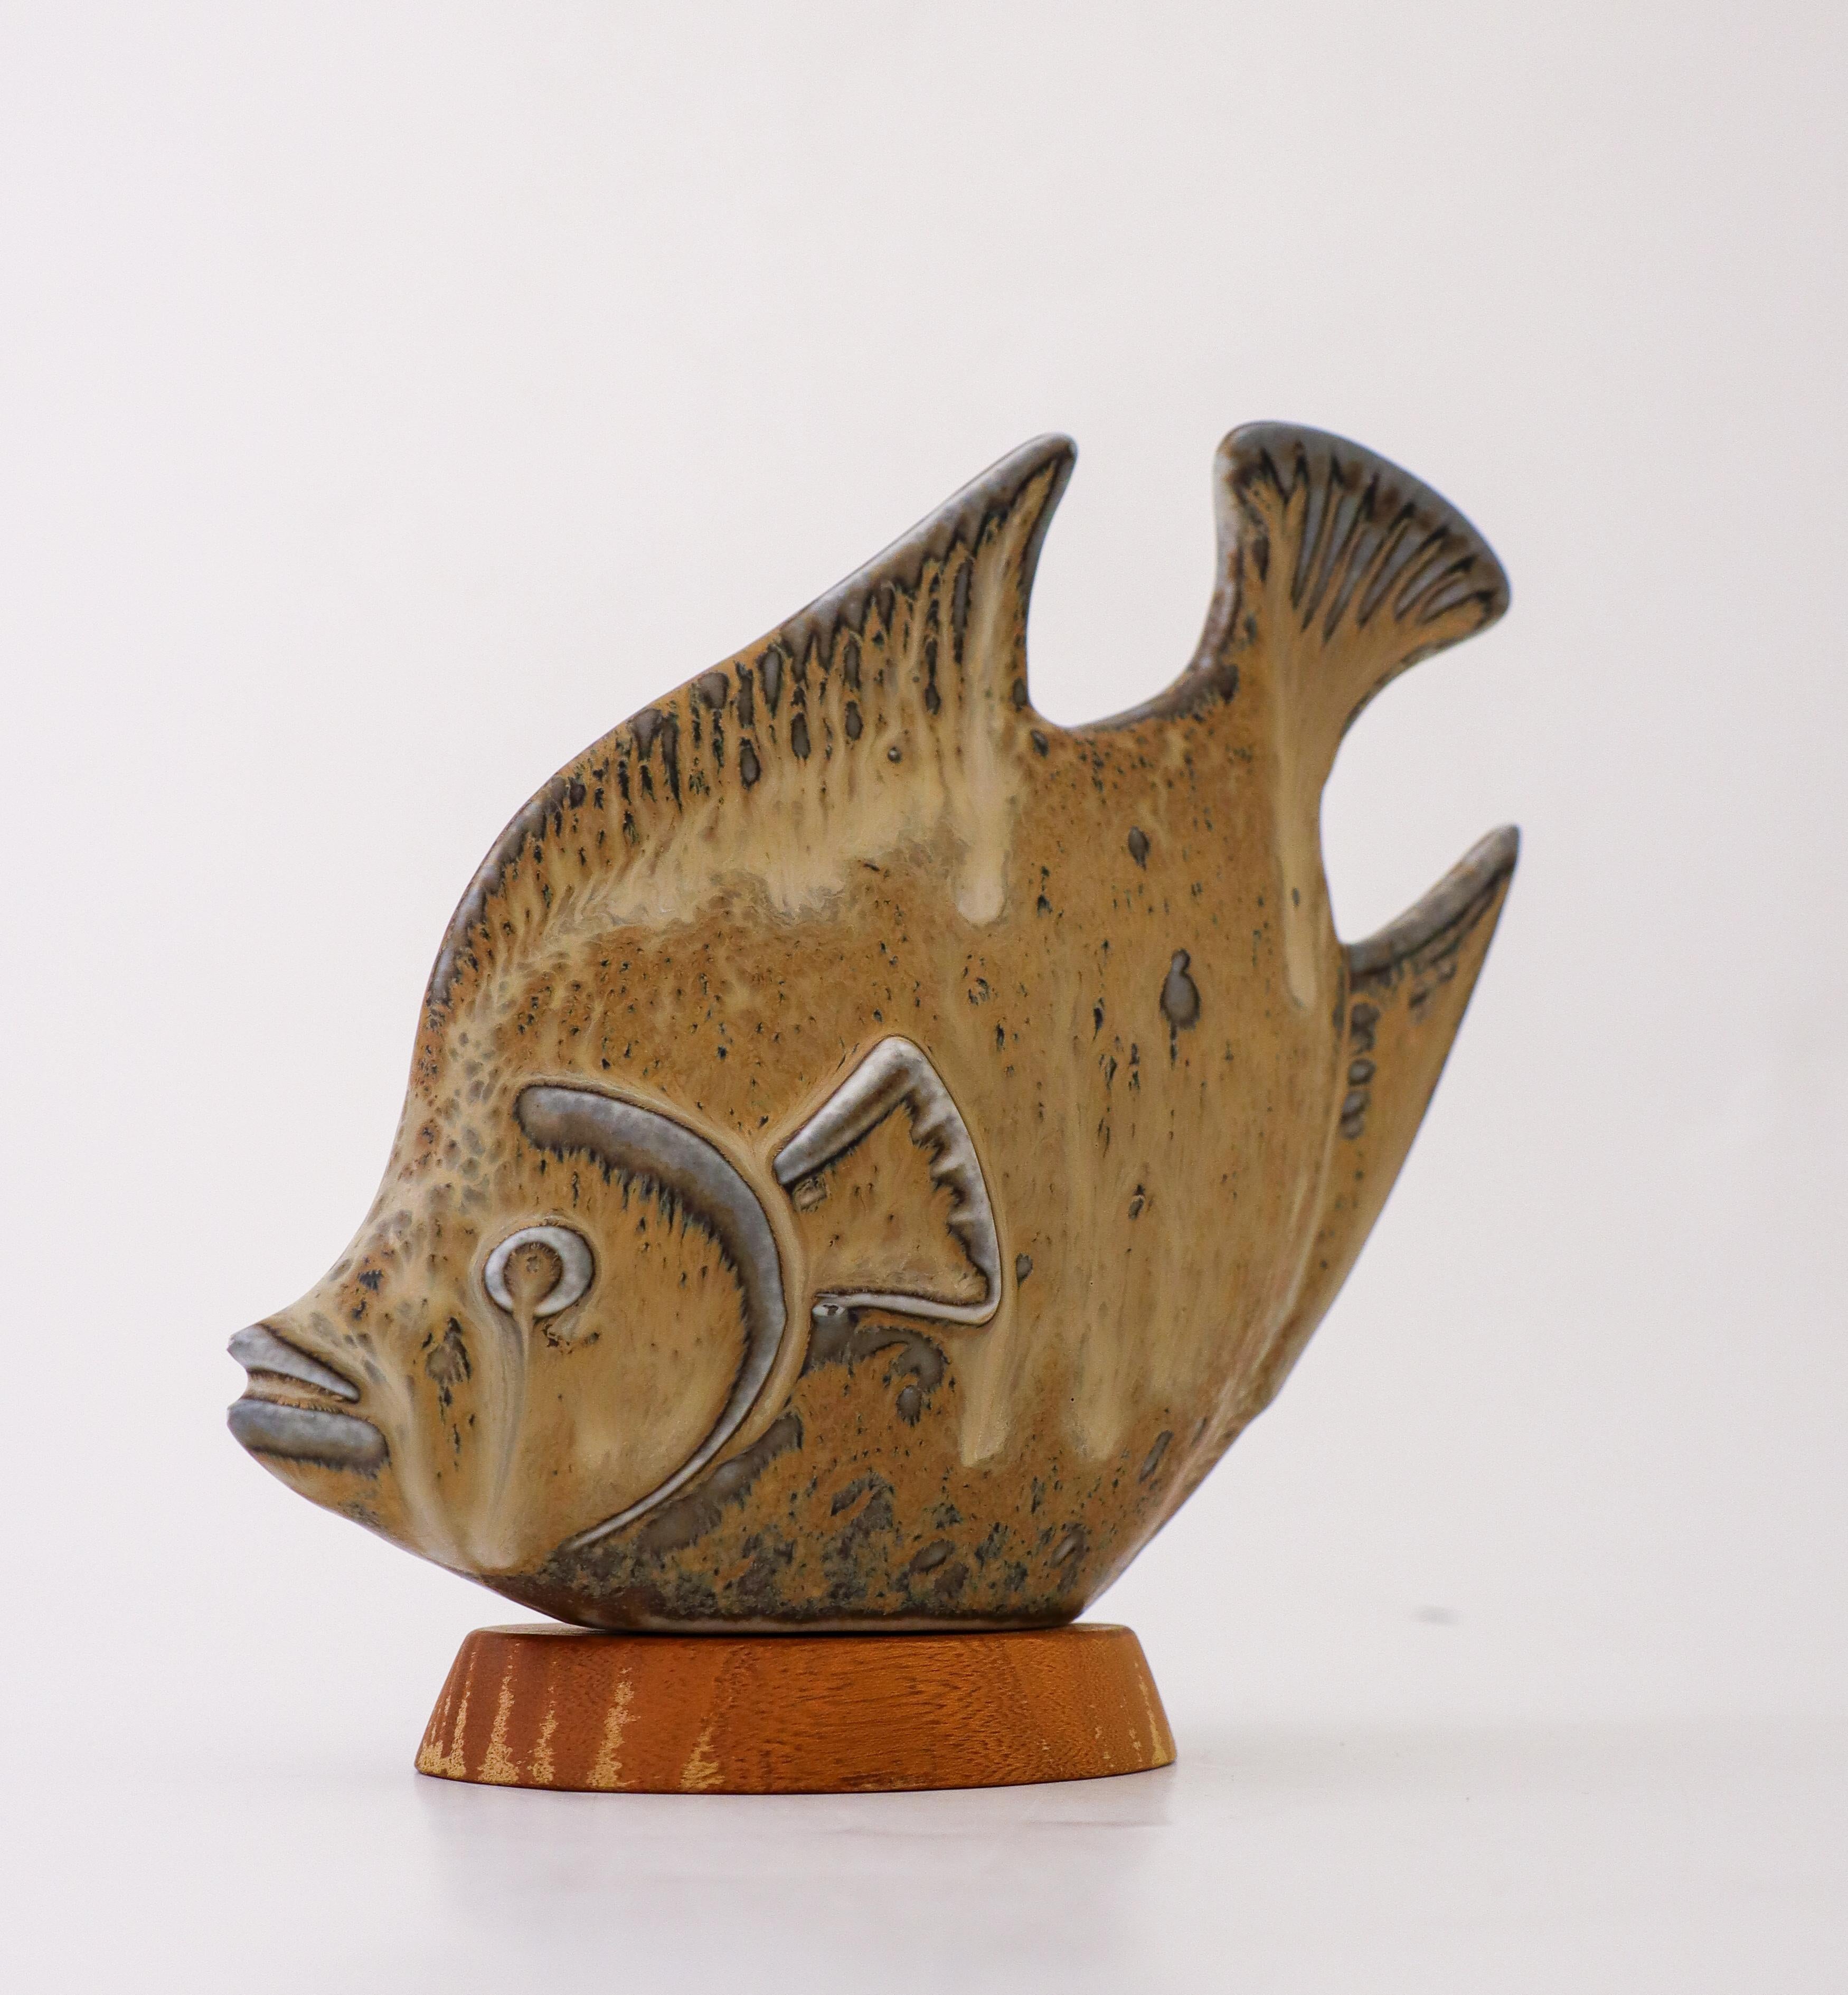 A lovely fish sculpture in ceramic designed by Gunnar Nylund at Rörstrand. It is 16.5 cm (6.6